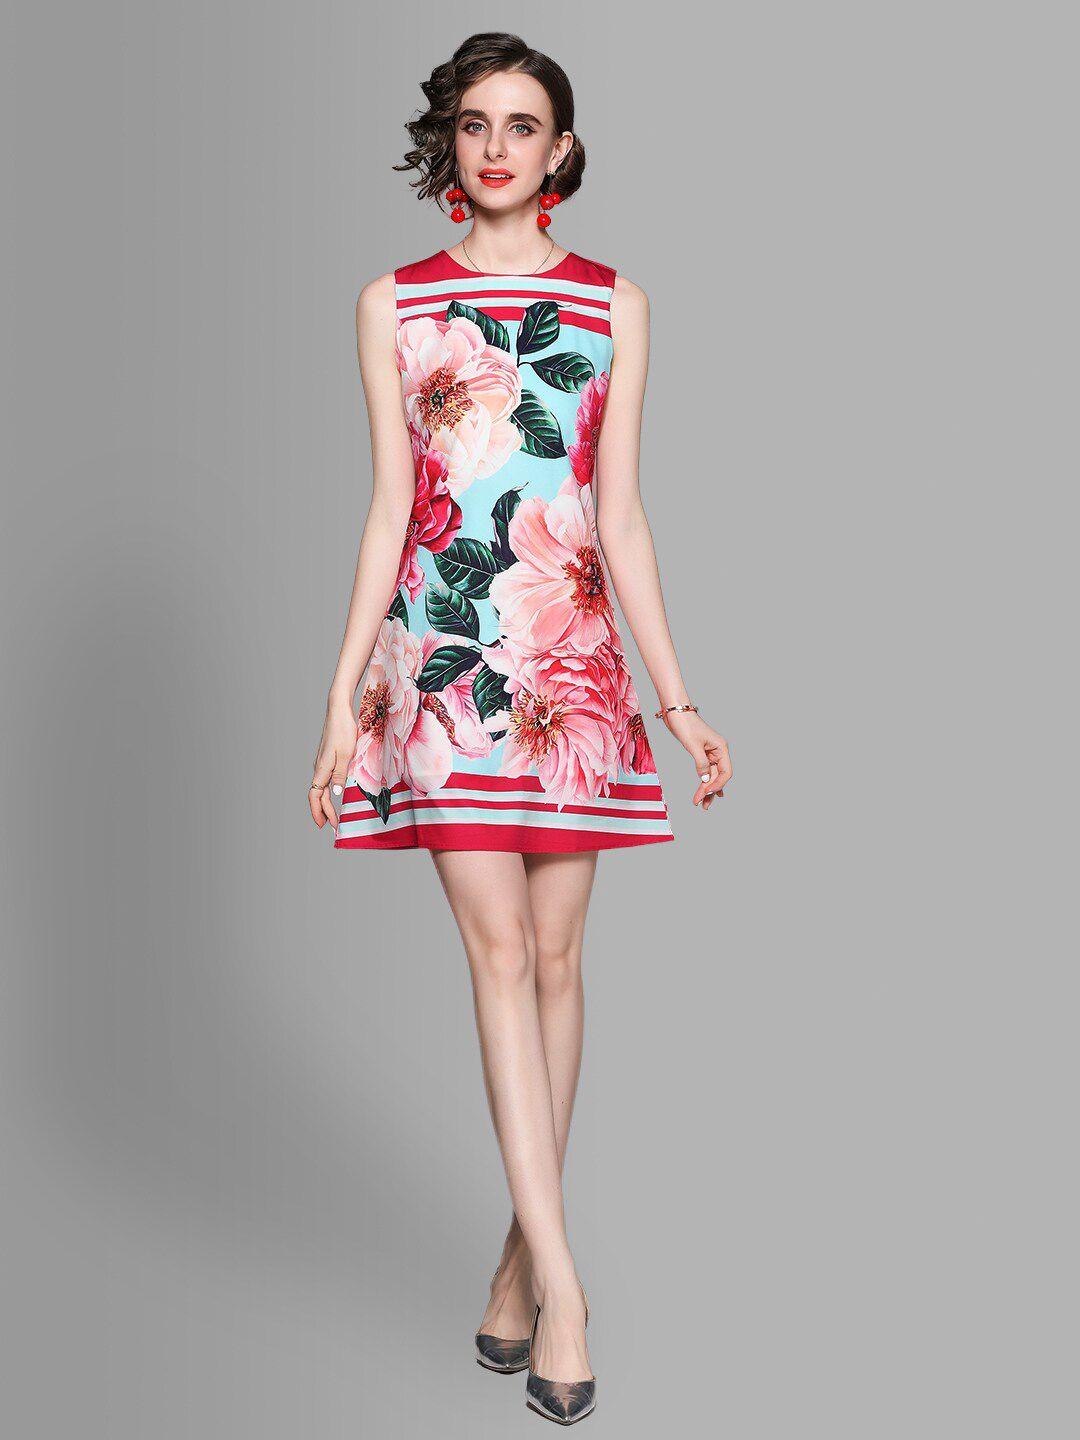 jc collection red & turquoise blue floral printed a-line dress